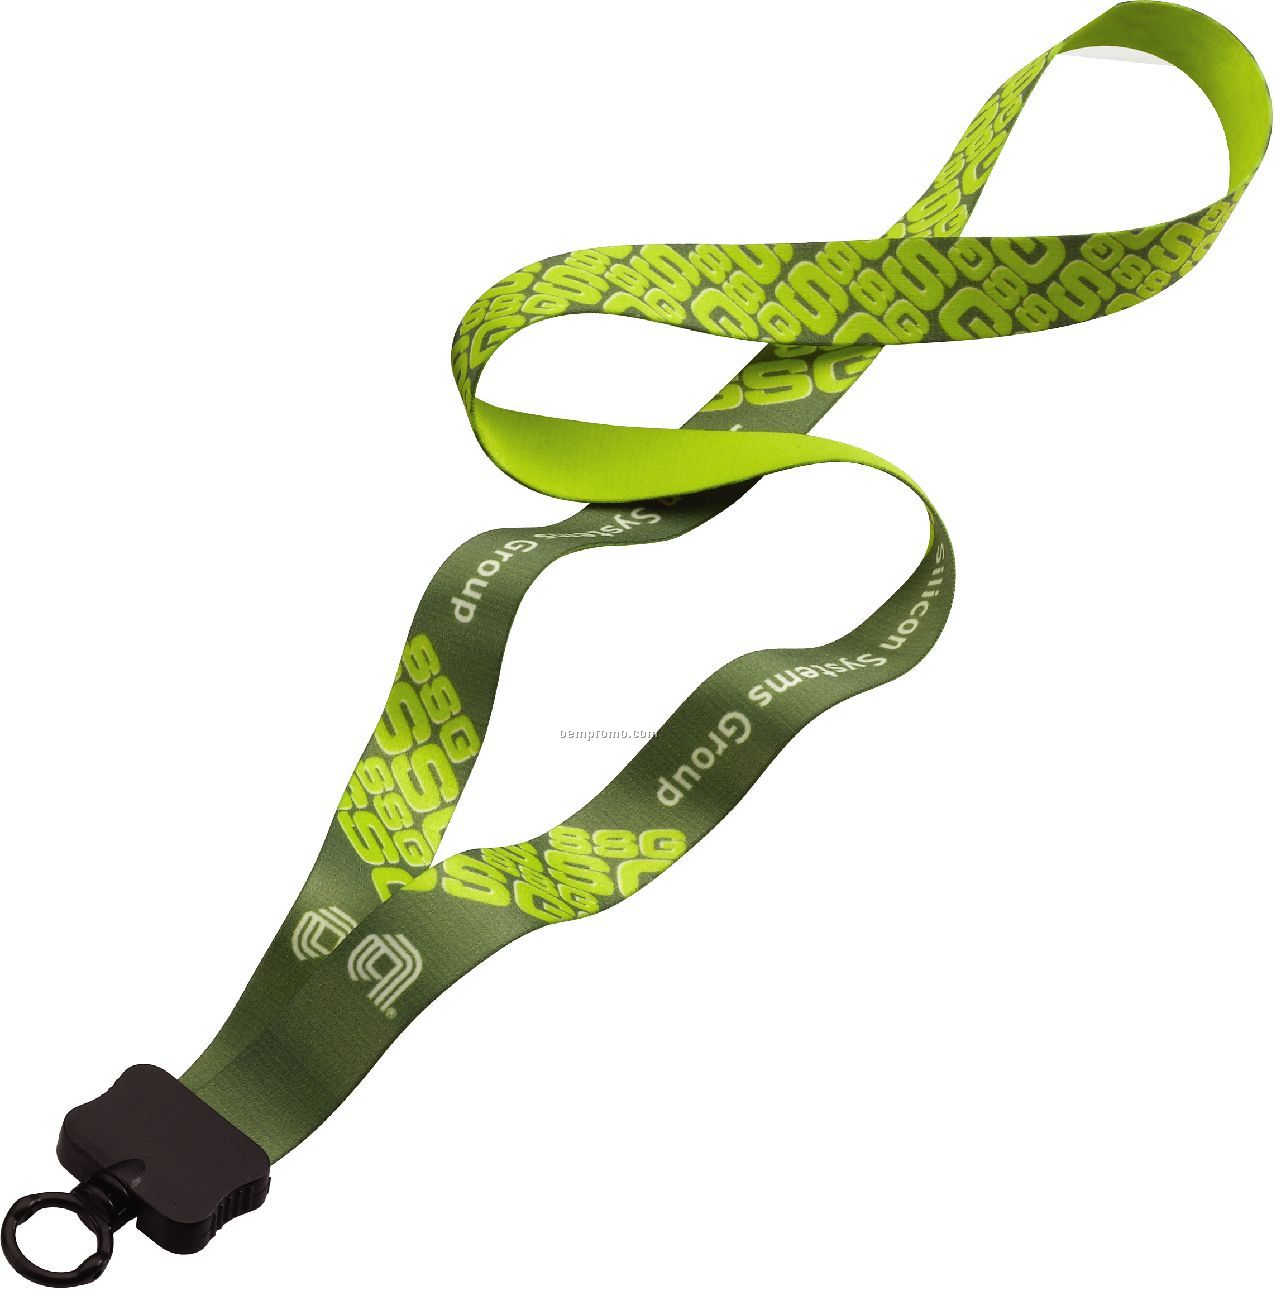 3/4" Dye Sublimated Lanyard With Plastic Clamshell & O-ring